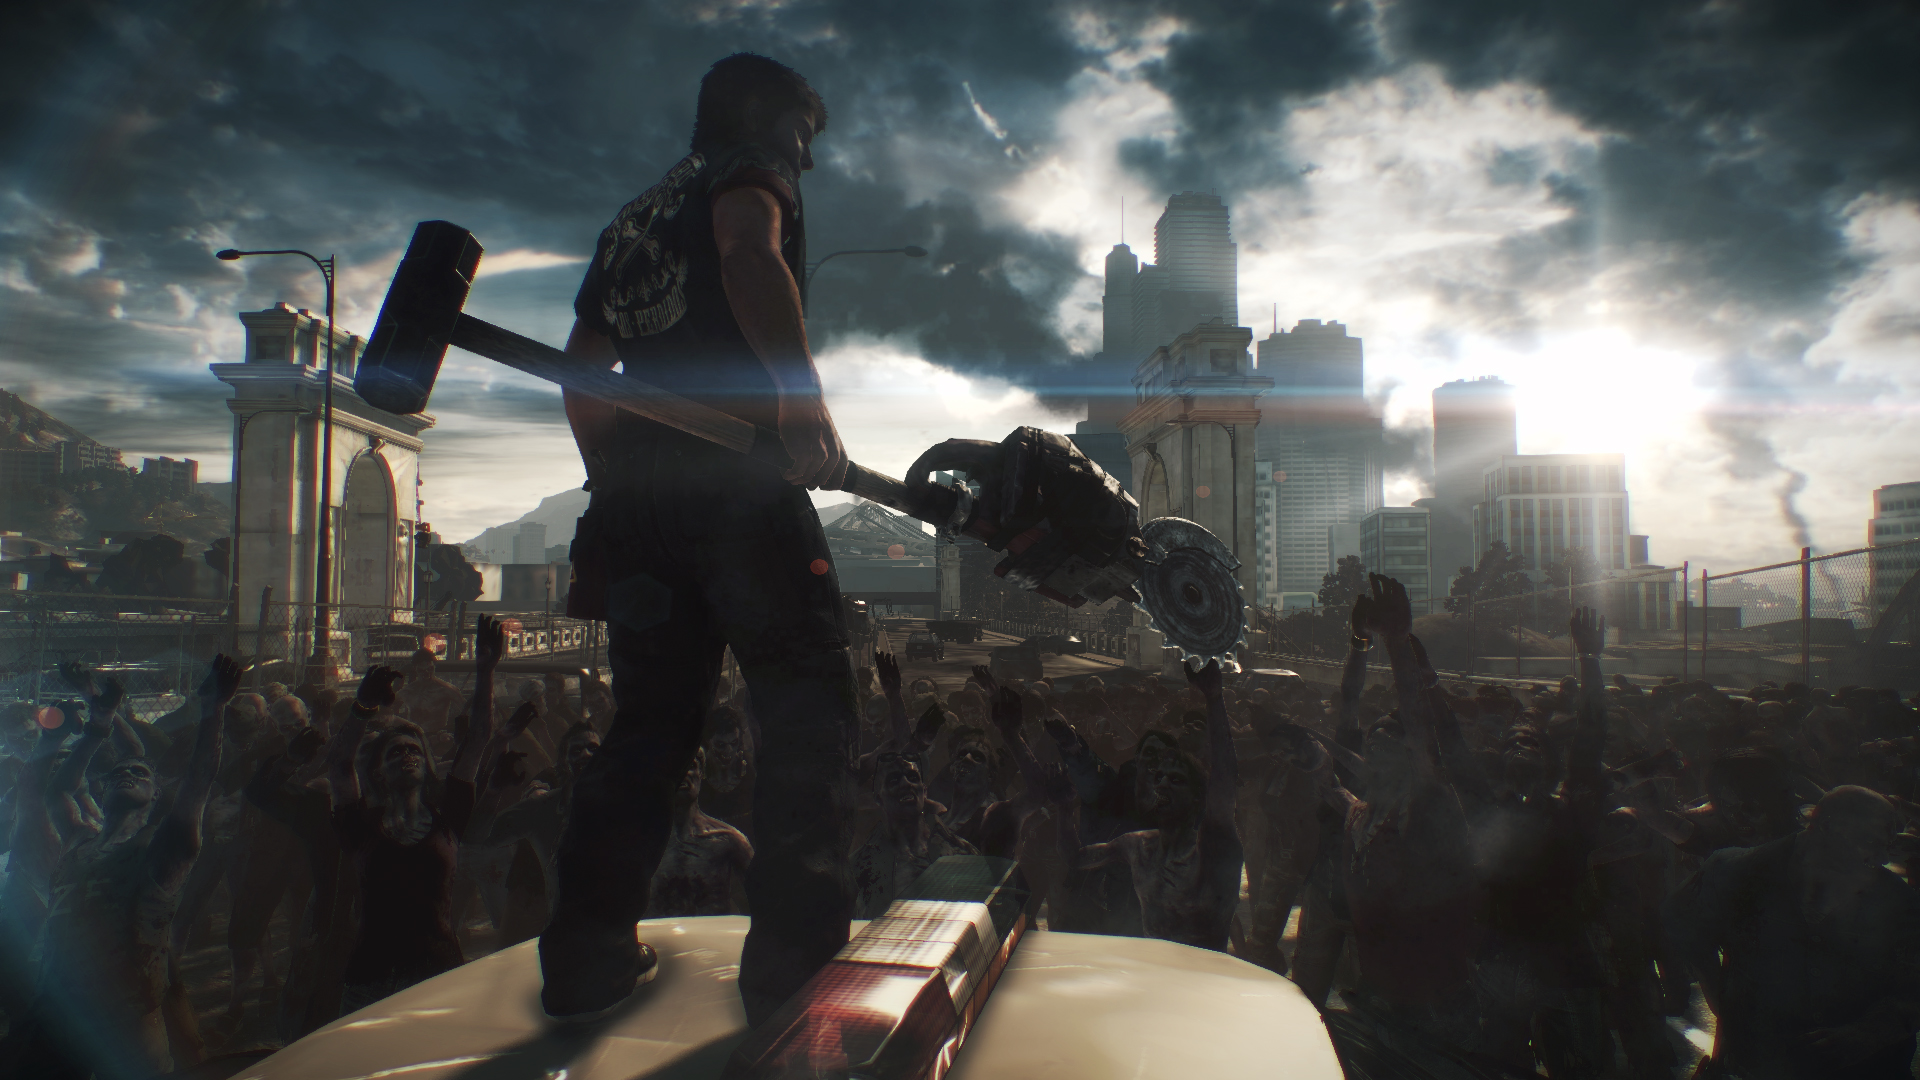 Nice Images Collection: Dead Rising 3 Desktop Wallpapers